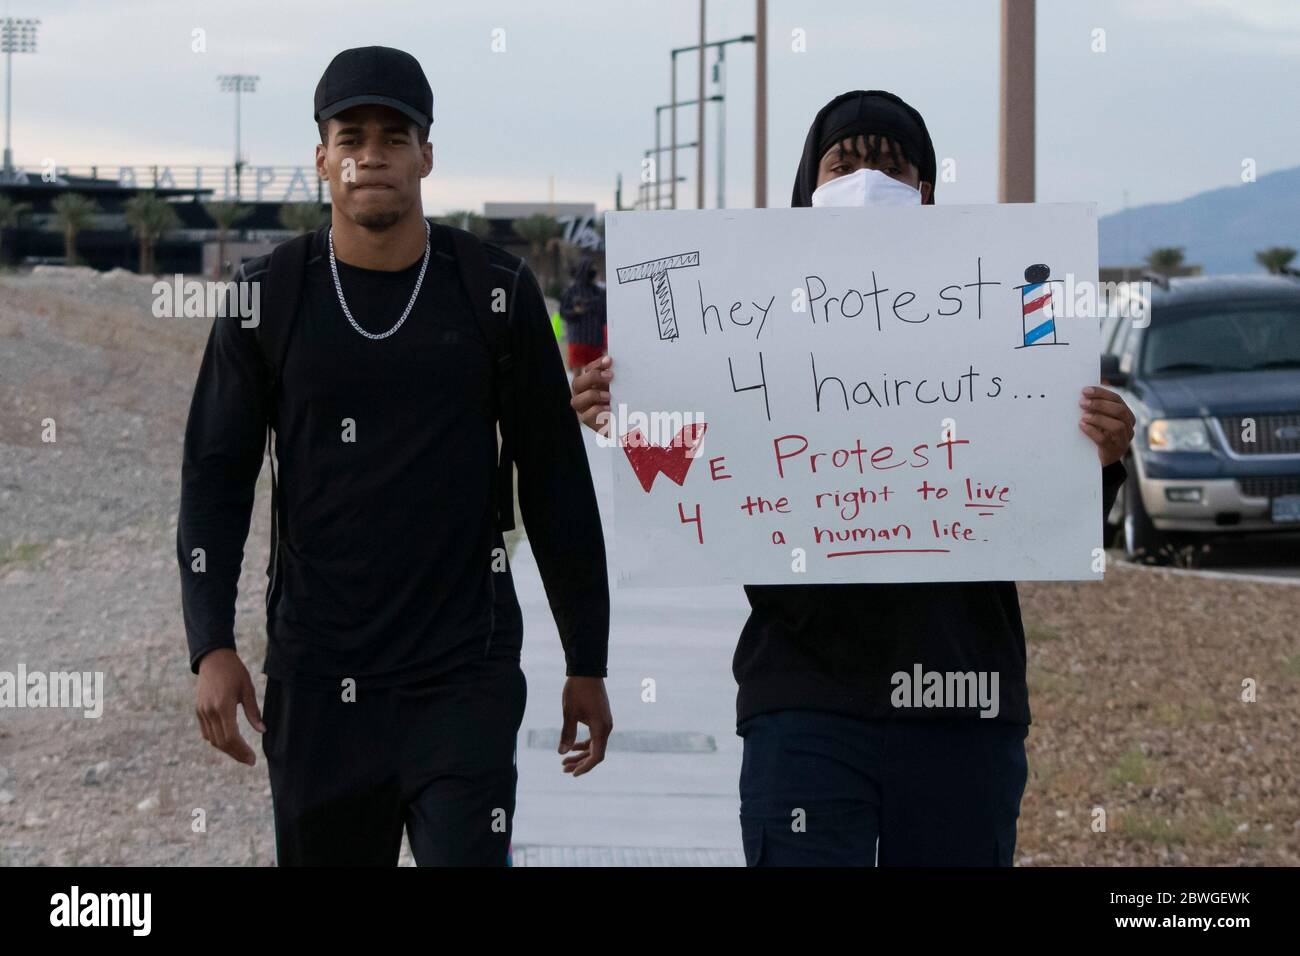 Las Vegas, USA. 31st May, 2020. Las Vegas, NV - May 31, 2020: Protesters gather outside Downtown Summerlin near a shopping complex during continuting nights of Black Lives Matter Protests on May 31, 2020 in Las Vegas, Nevada. Credit: Shannon Beelman/The Photo Access Credit: The Photo Access/Alamy Live News Stock Photo